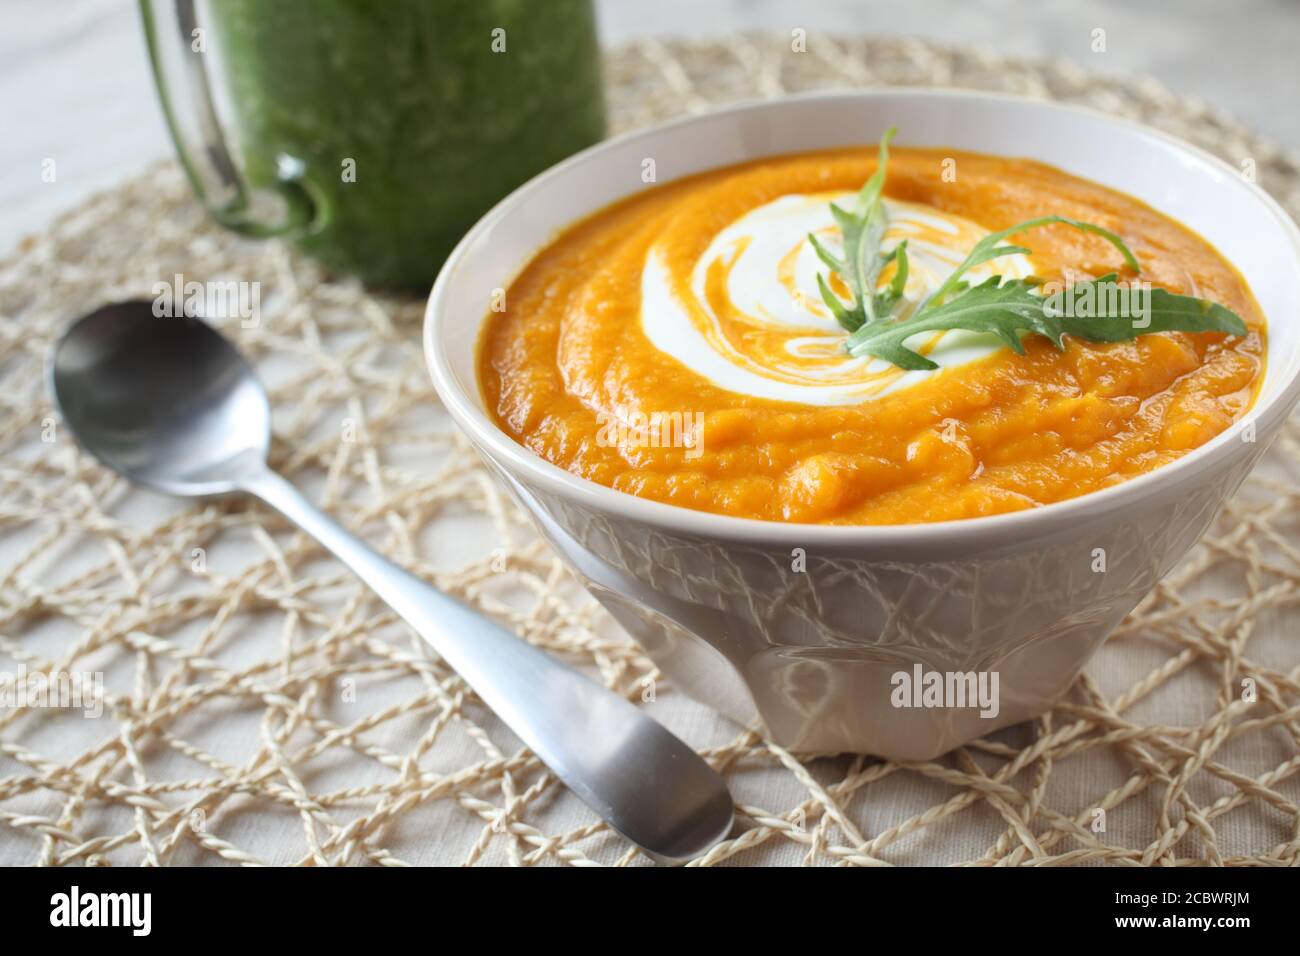 Pumpkin puree with sour cream and arugula and green smoothie Stock Photo